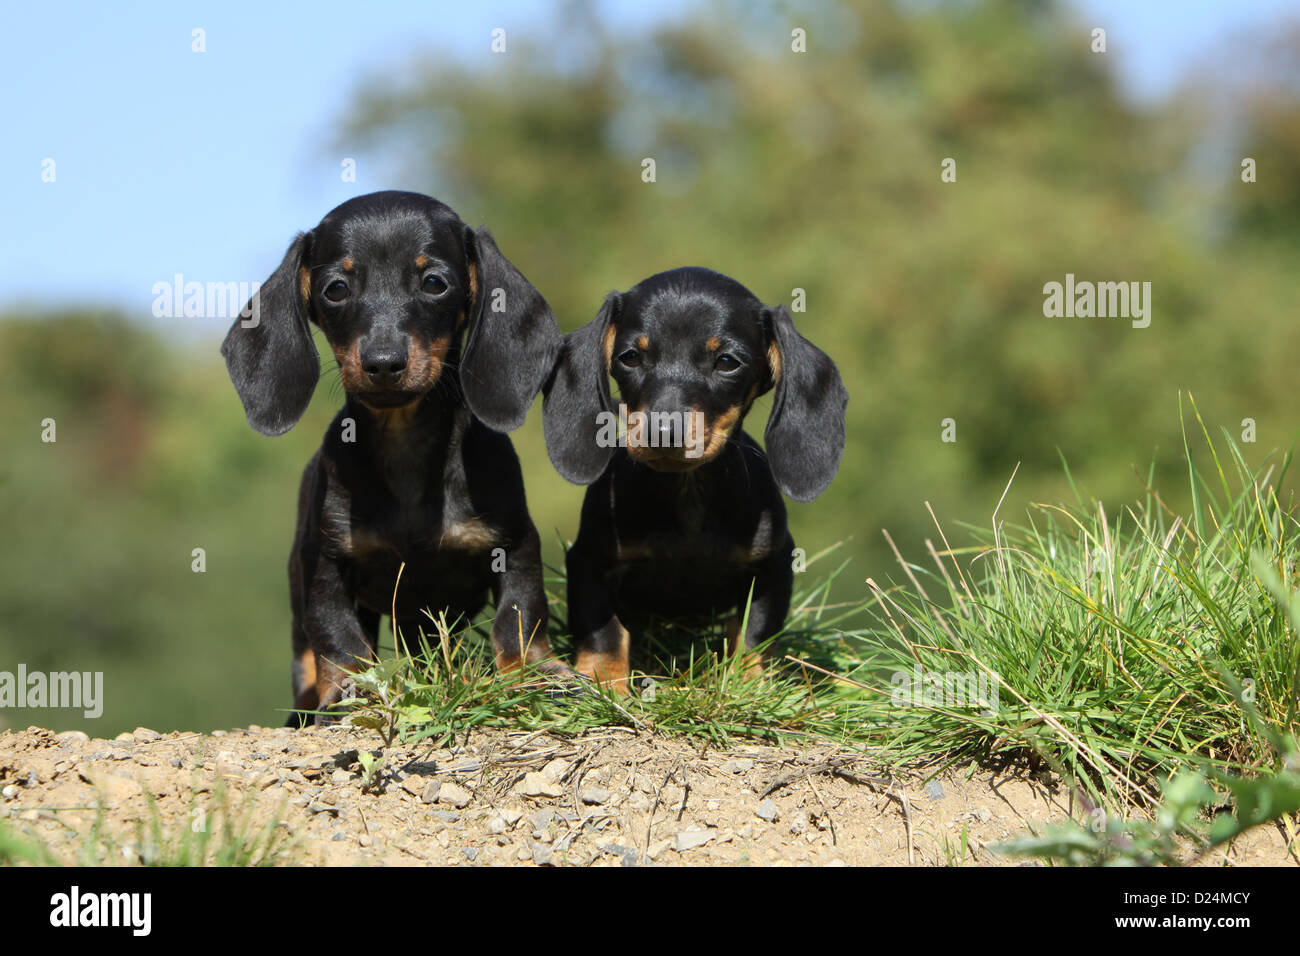 Dog Dachshund /  Dackel / Teckel  shorthaired two puppies (black and tan) sitting Stock Photo